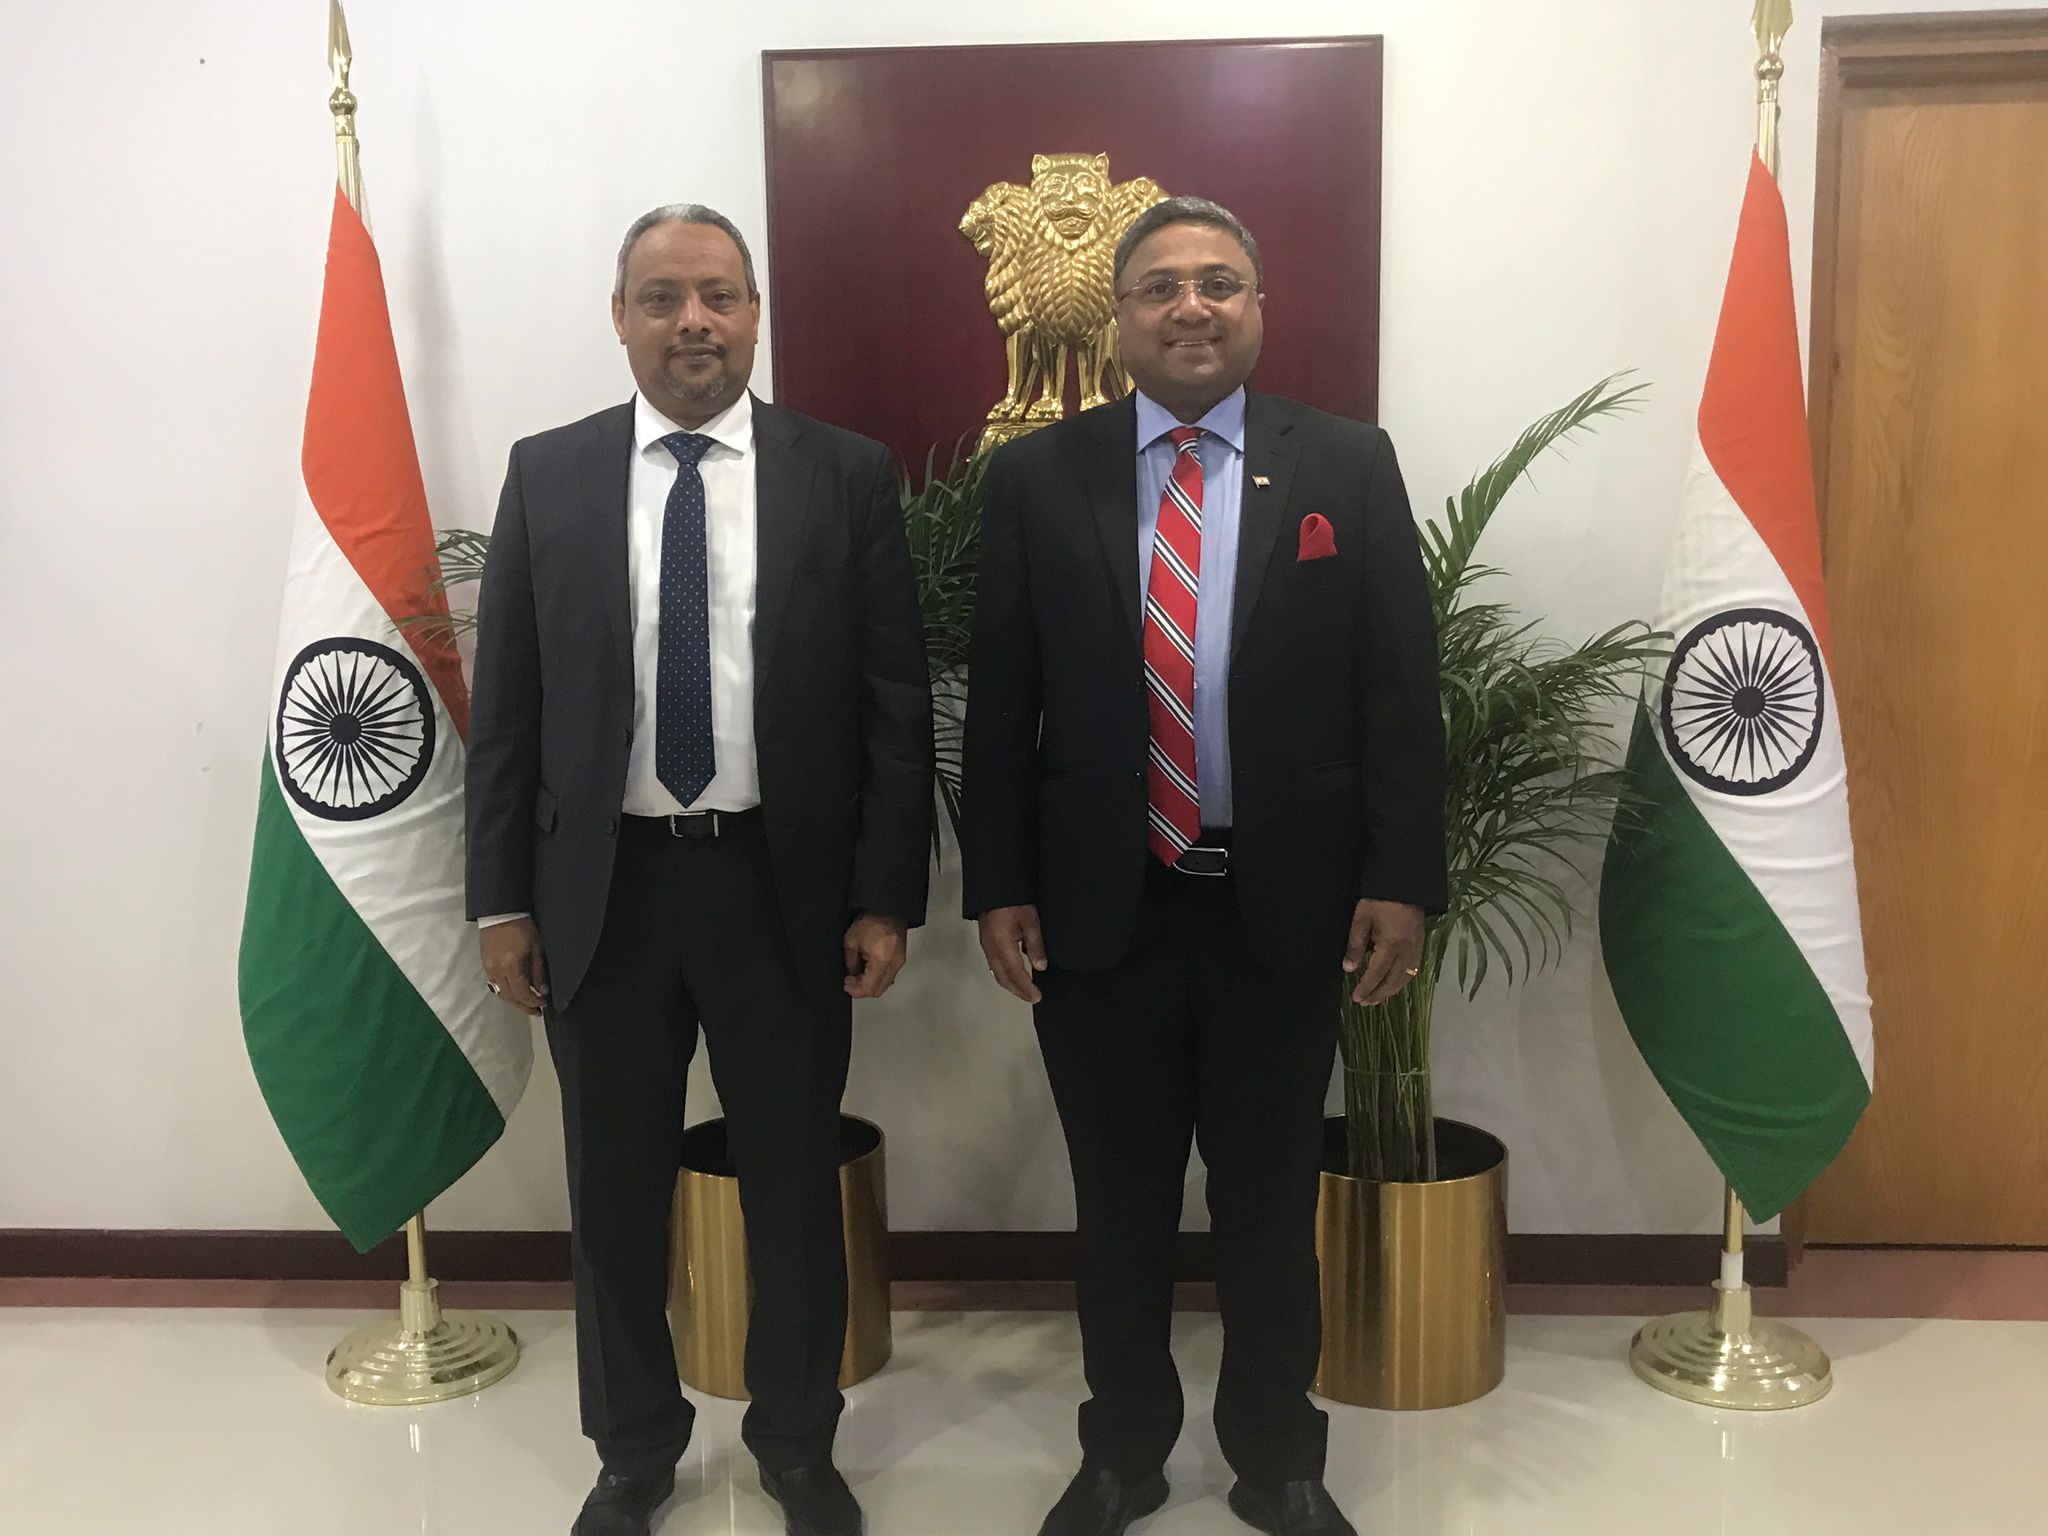 Visit of His Excellency to the Embassy of the Republic of India